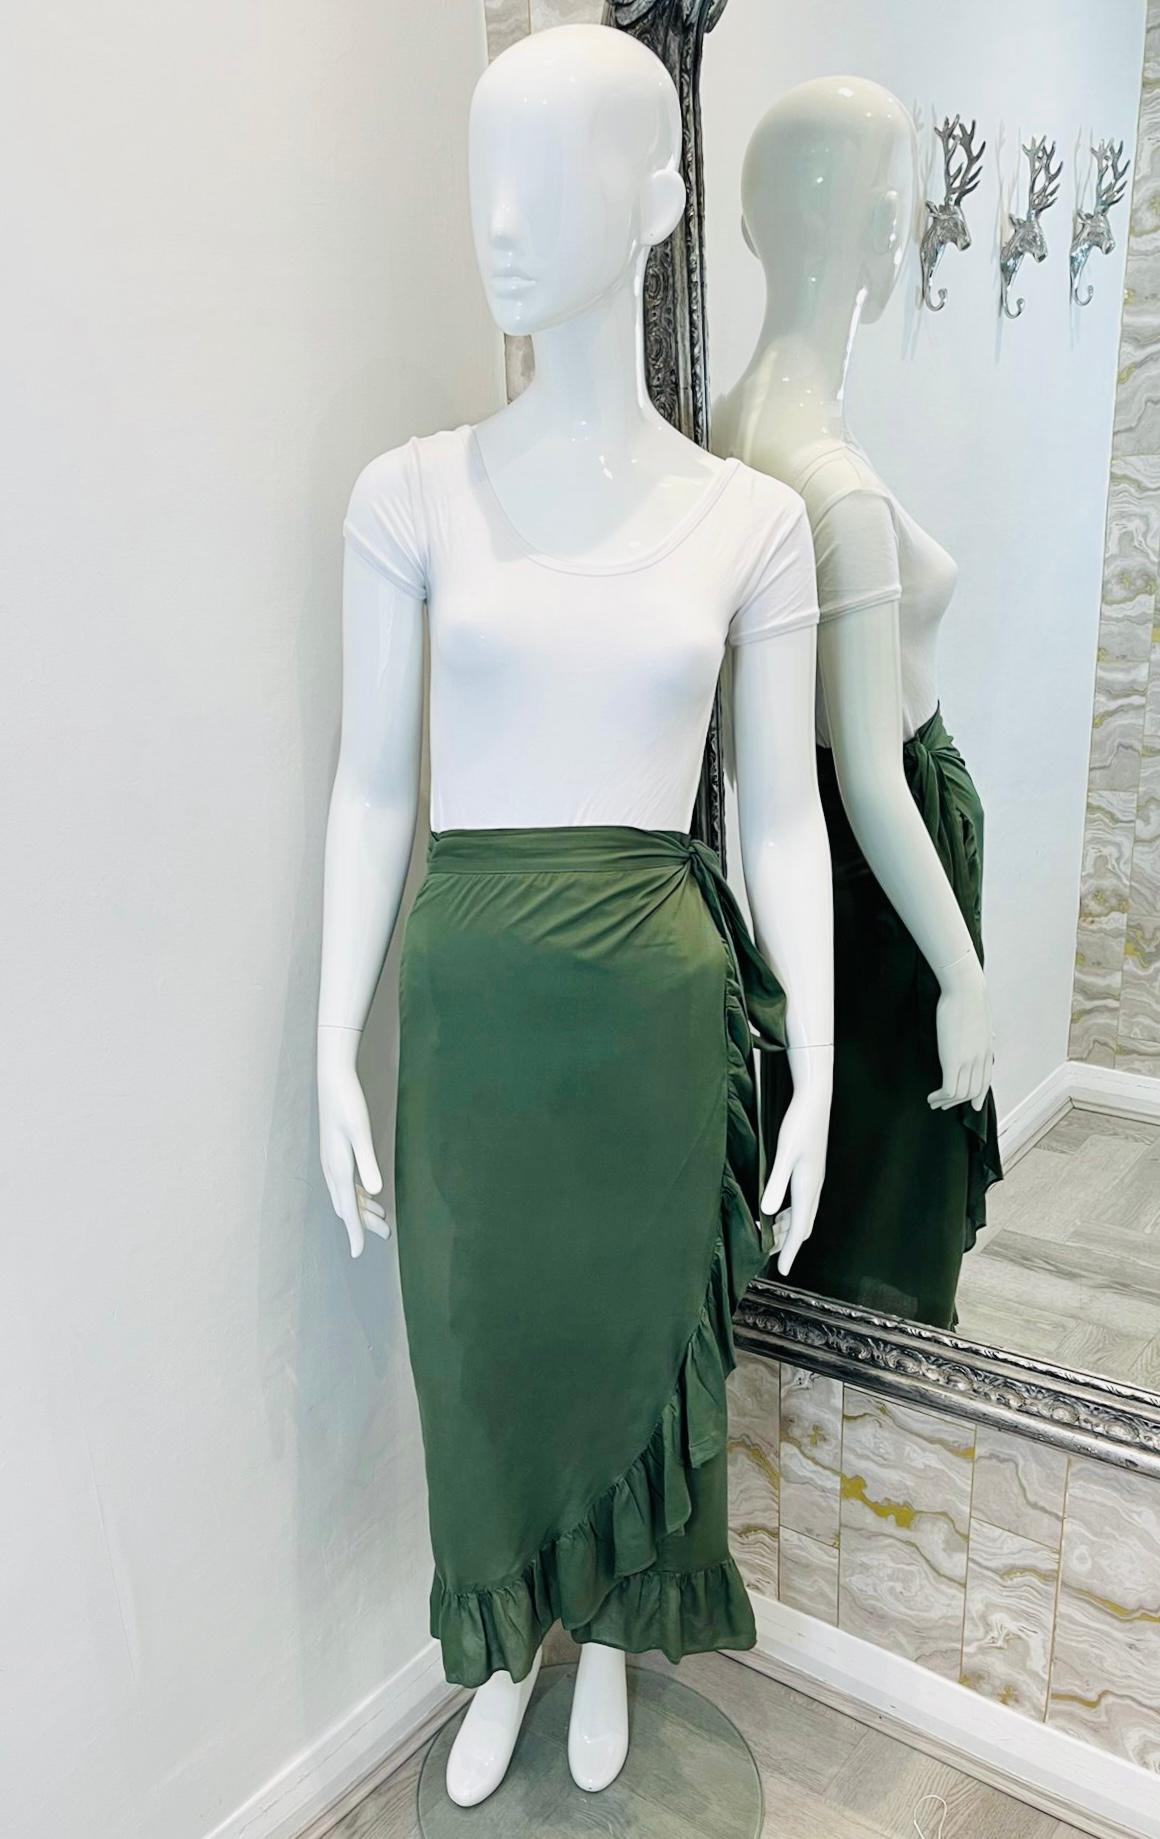 Melissa Odabash Wrap Skirt

Khaki midi 'Danni' skirt designed with flattering wrap style.

Detailed with frill trimmings and self-tie fastening to the side. Rrp £148

Size – S

Condition – Very Good

Composition – 100% Viscose